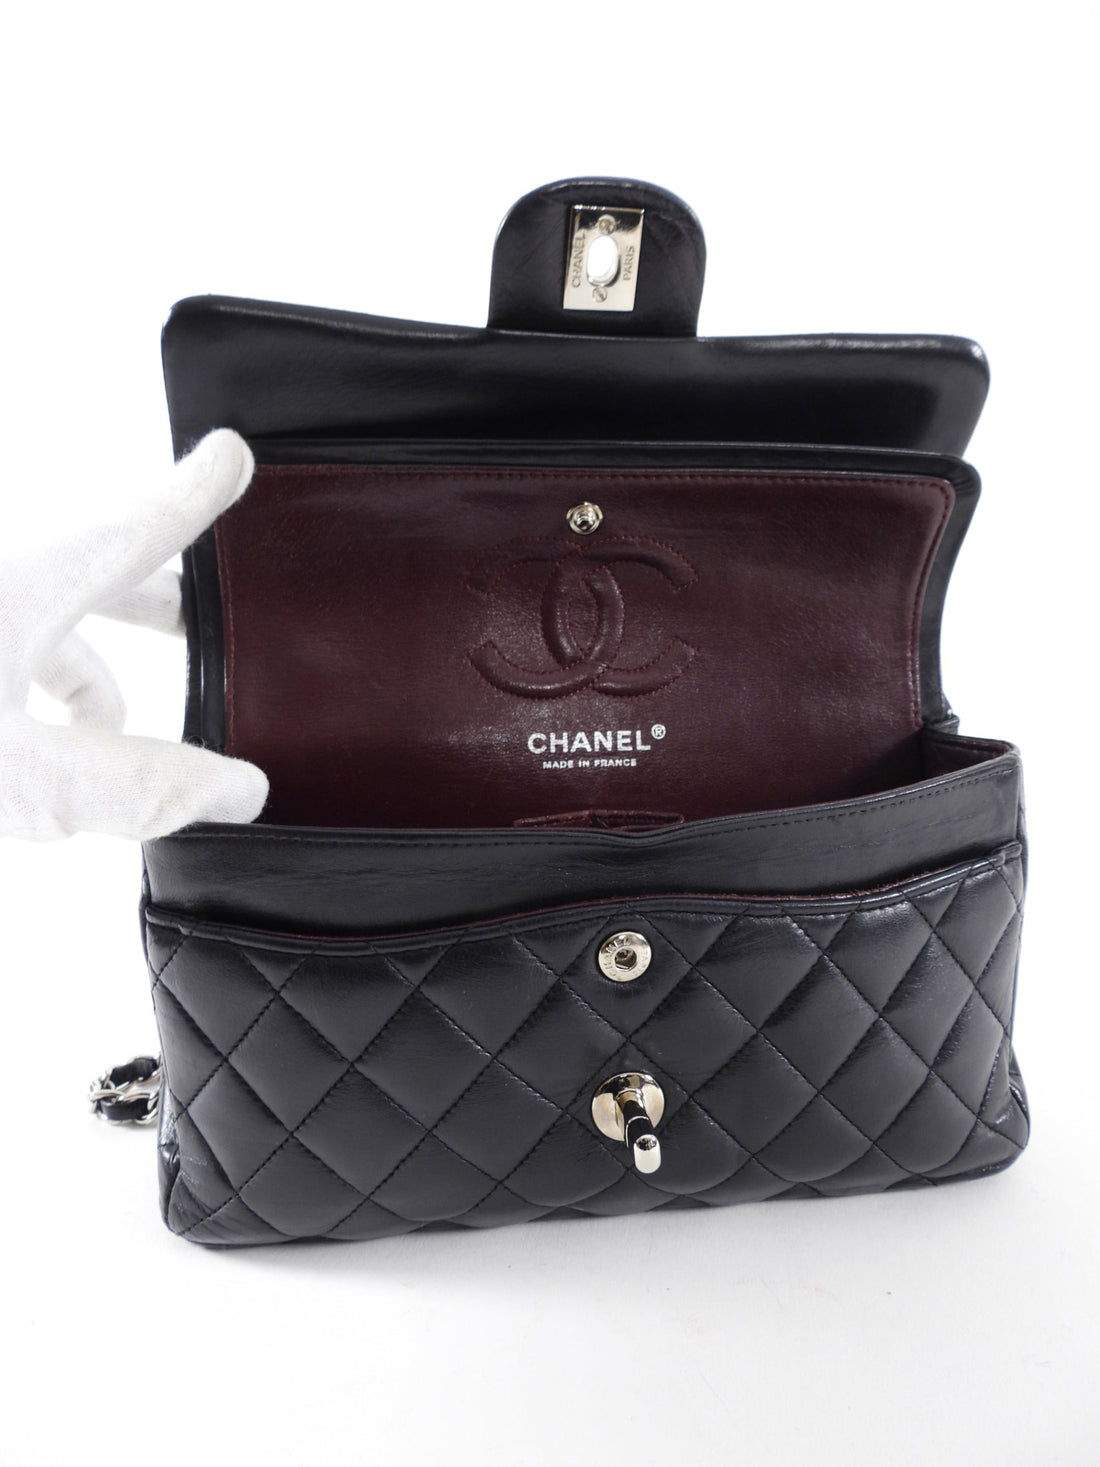 Chanel Black Lambskin Small Classic Double Flap SHW – I MISS YOU